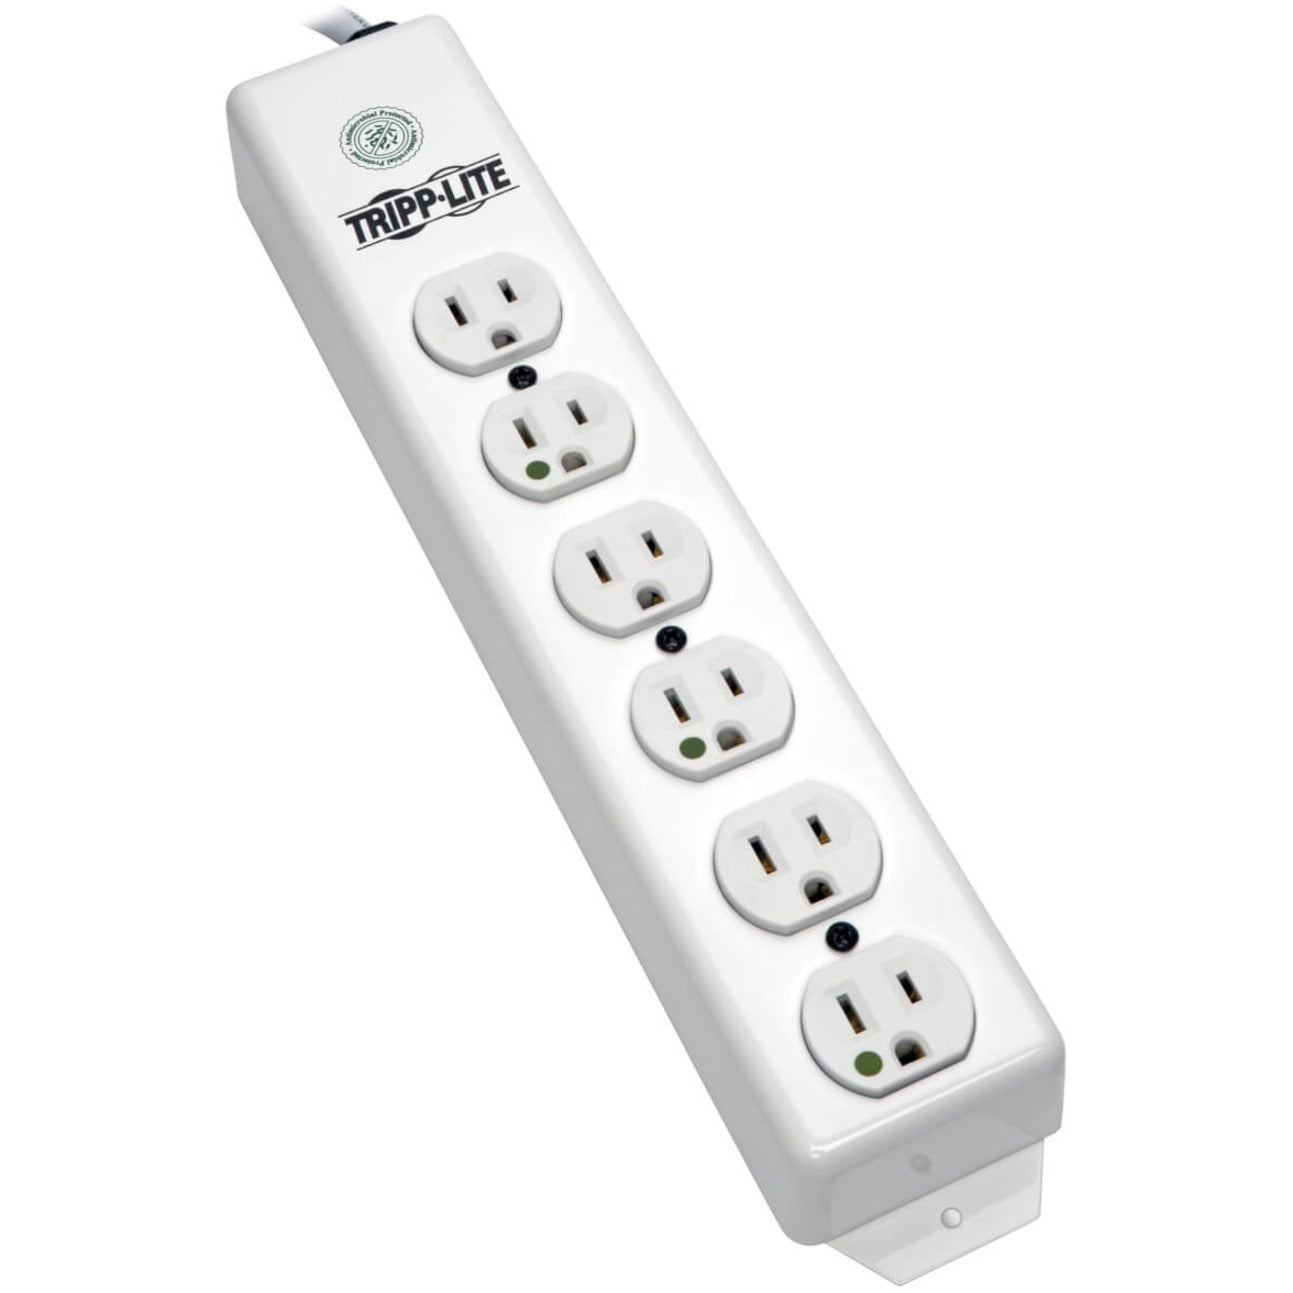 Tripp Lite PS-602-HG Power Strip, 6 Outlets, 120V AC, 15A, RoHS Certified